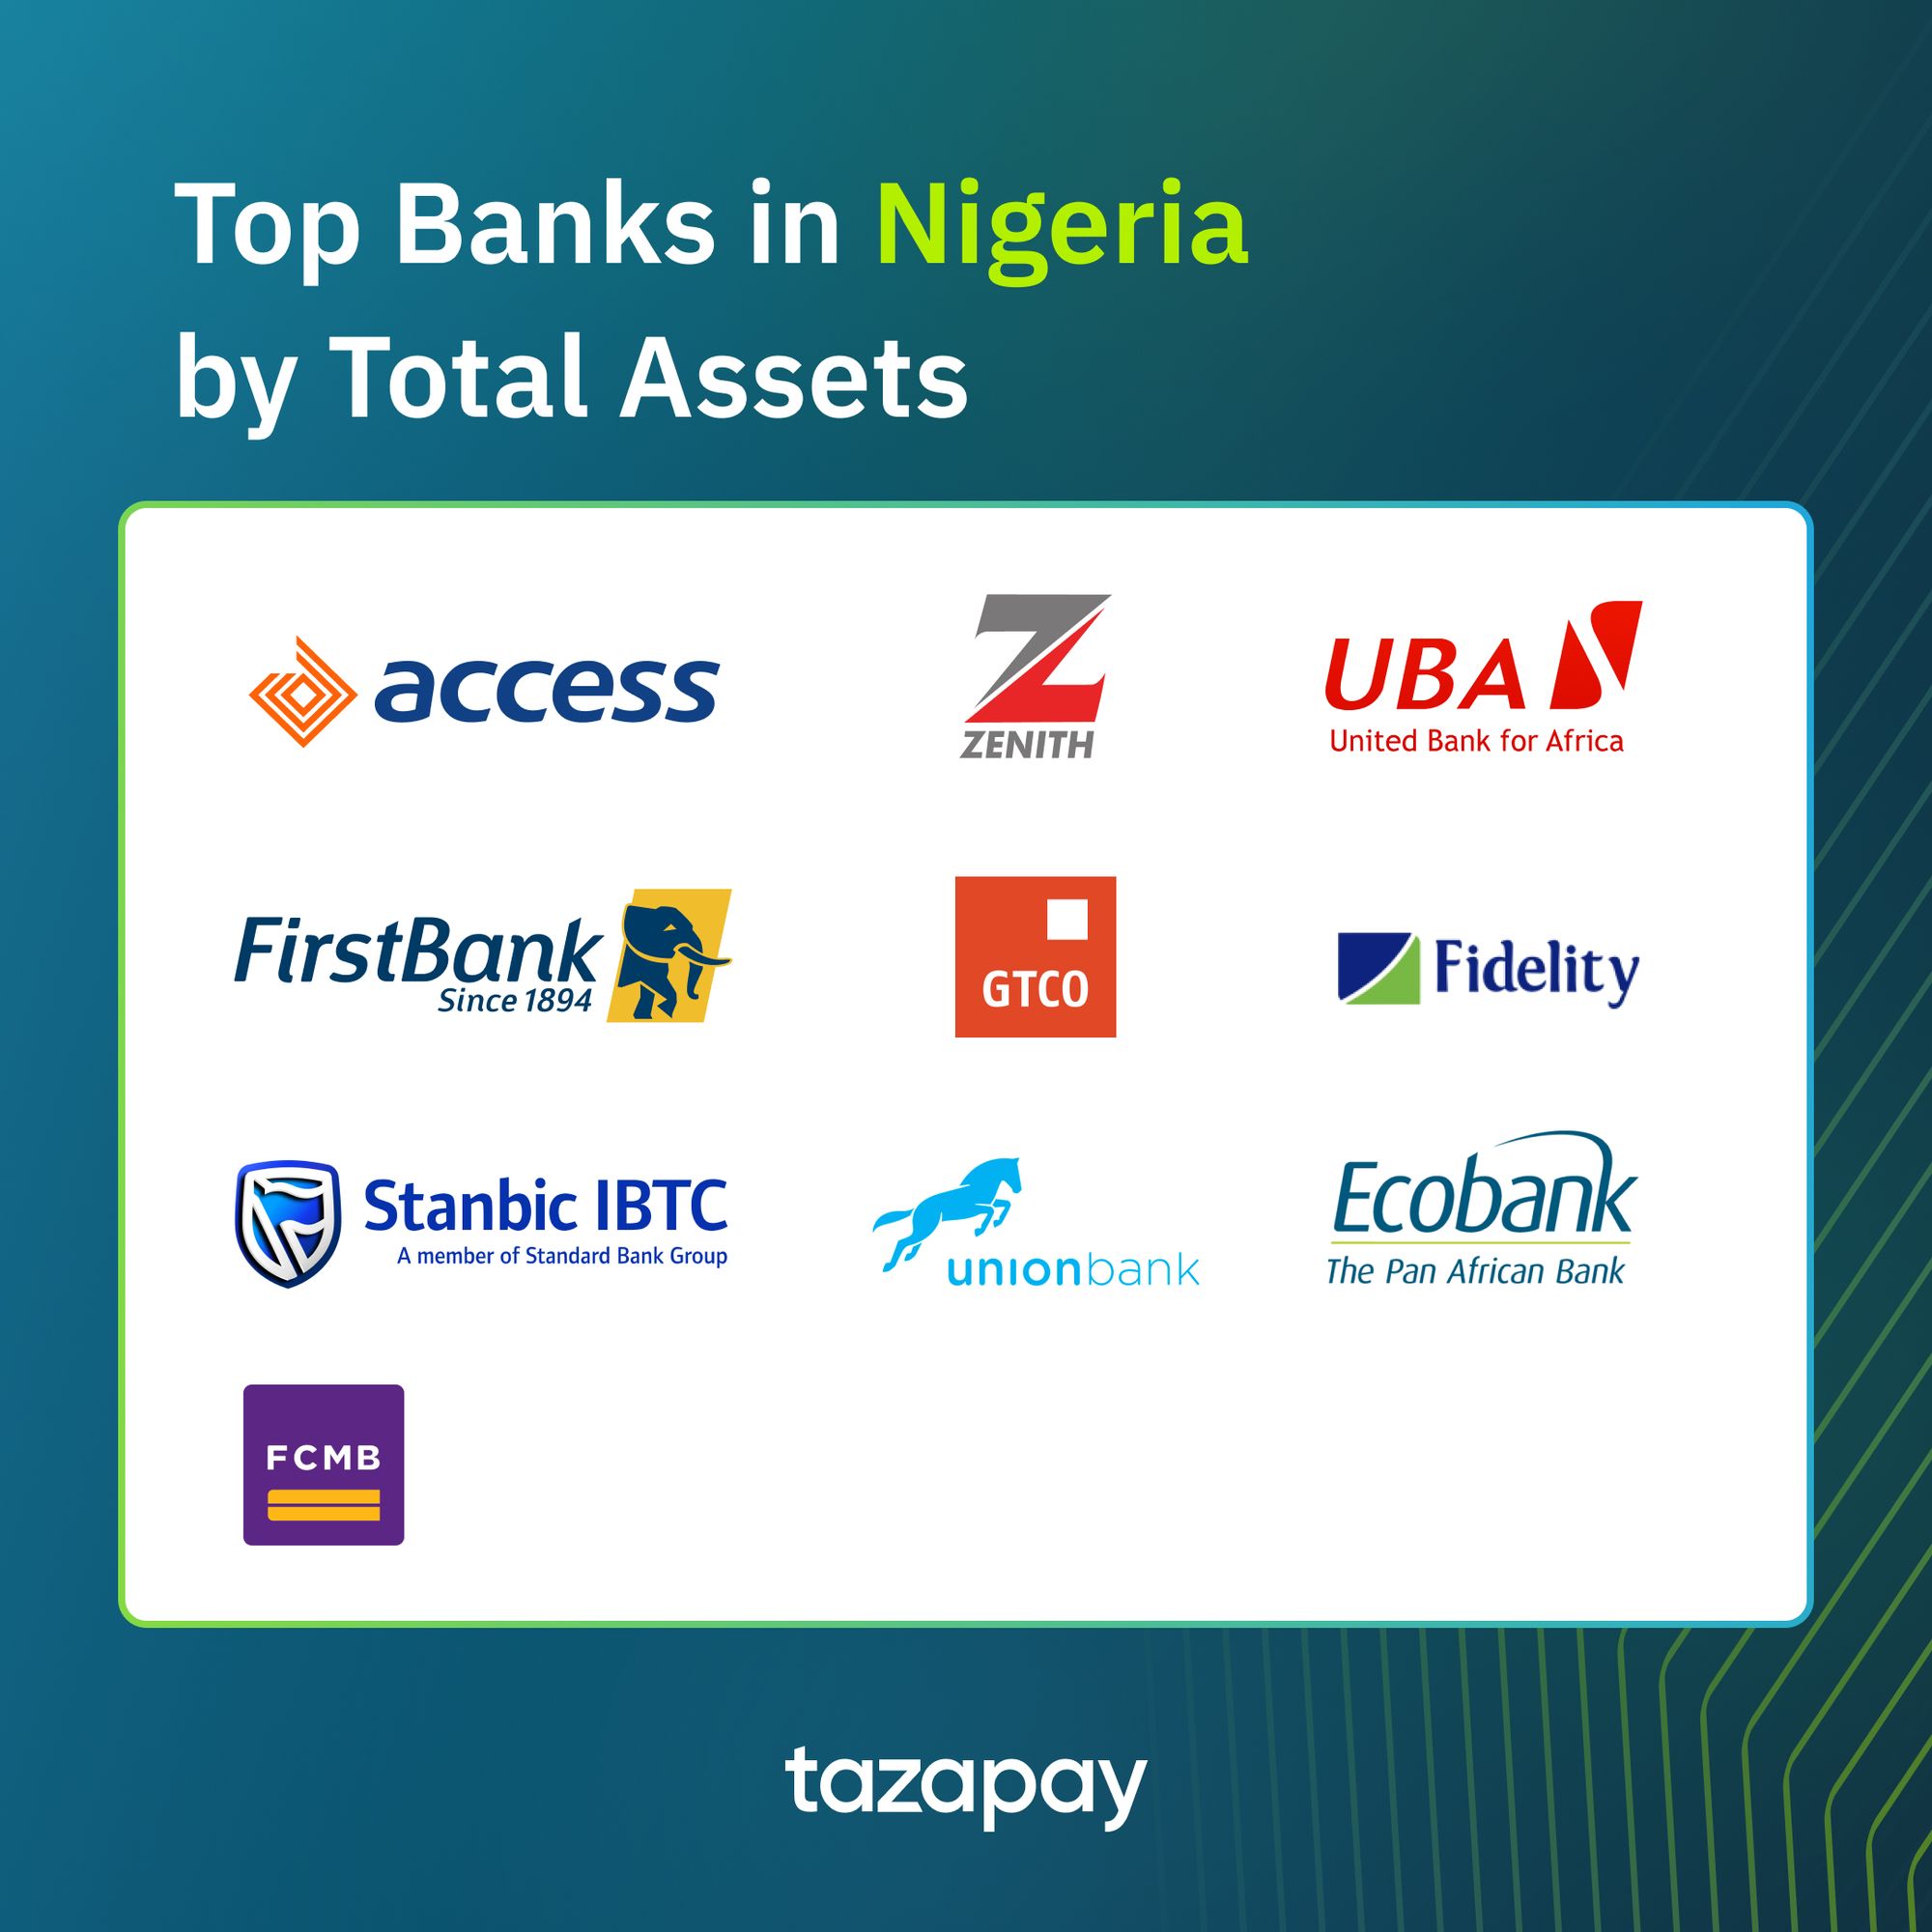 Top banks in Nigeria by total assets